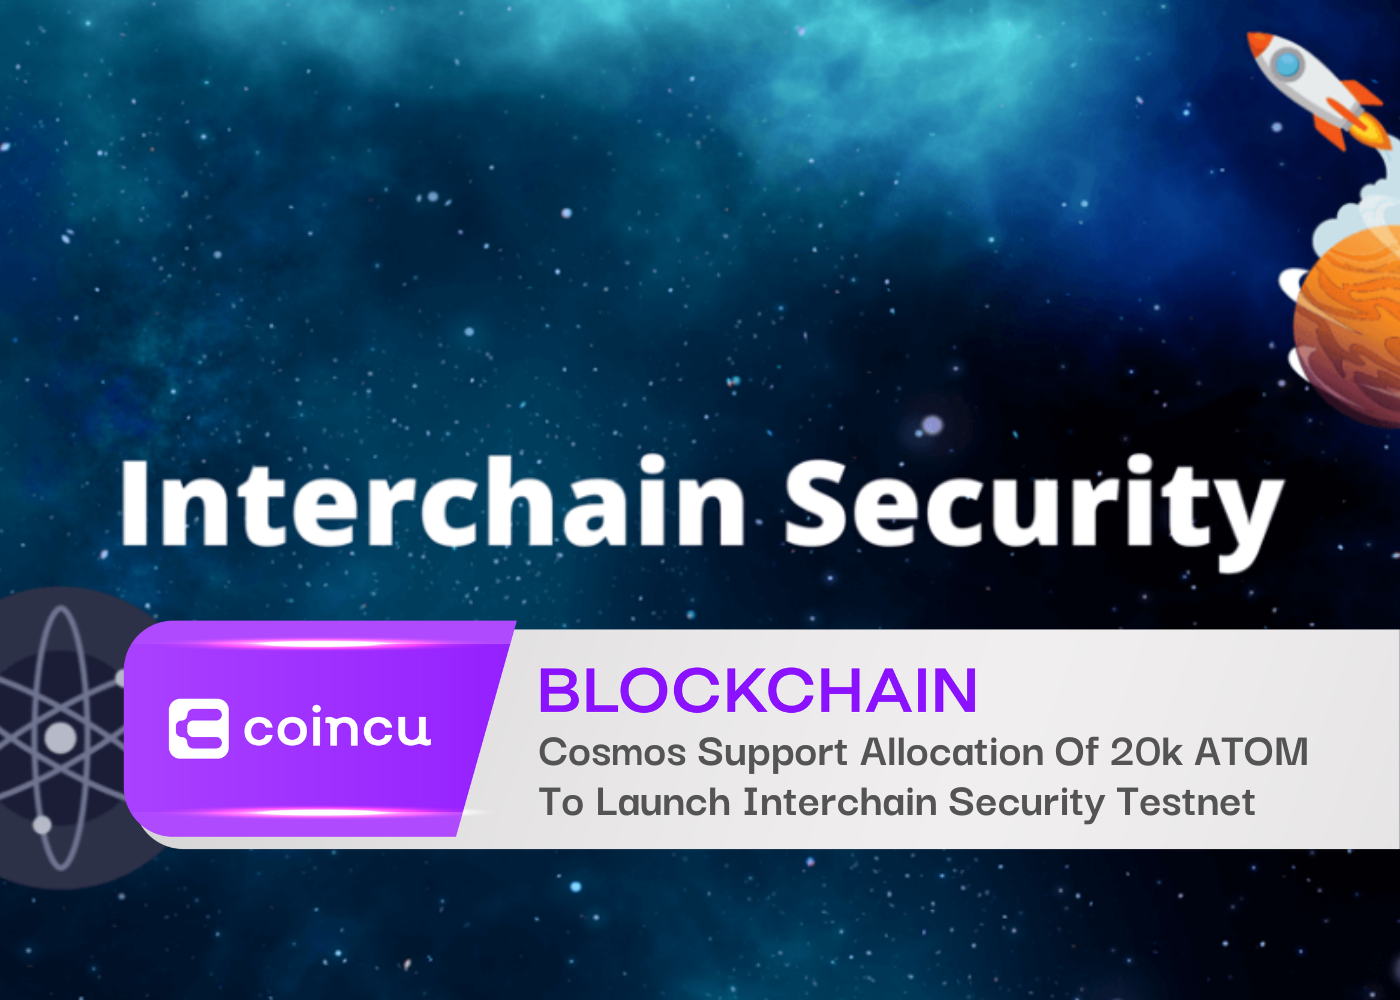 96% Of Cosmos Community Support Allocation Of 20,000 ATOM To Launch Interchain Security Testnet